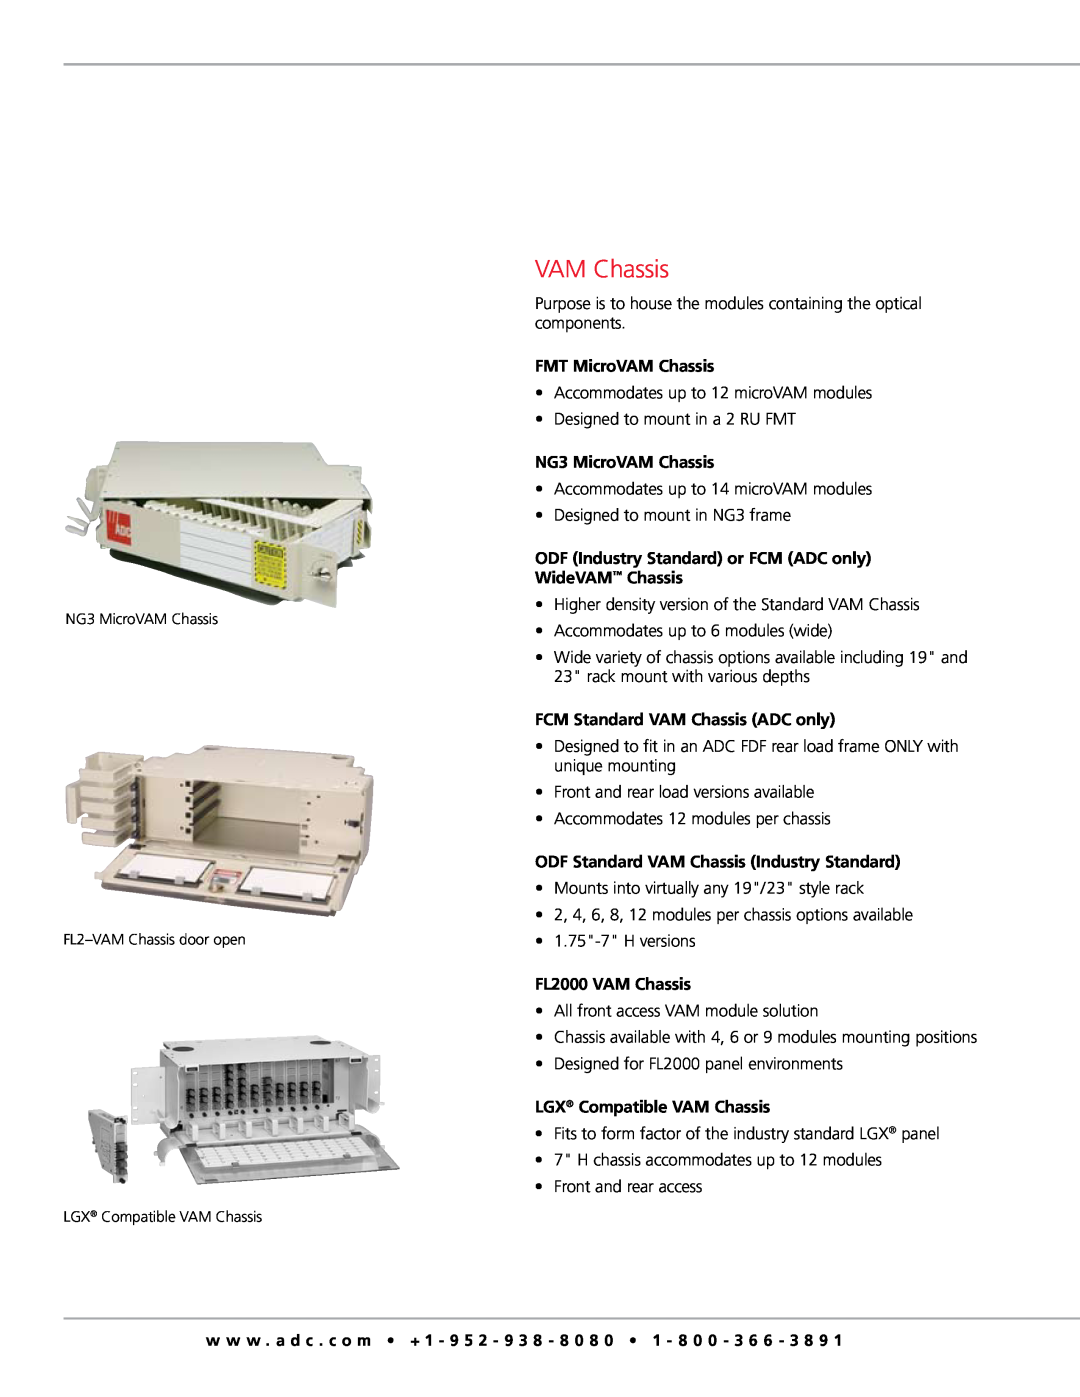 ADC VAM (Value Added Modules) System FMT MicroVAM Chassis, NG3 MicroVAM Chassis, FCM Standard VAM Chassis ADC only 